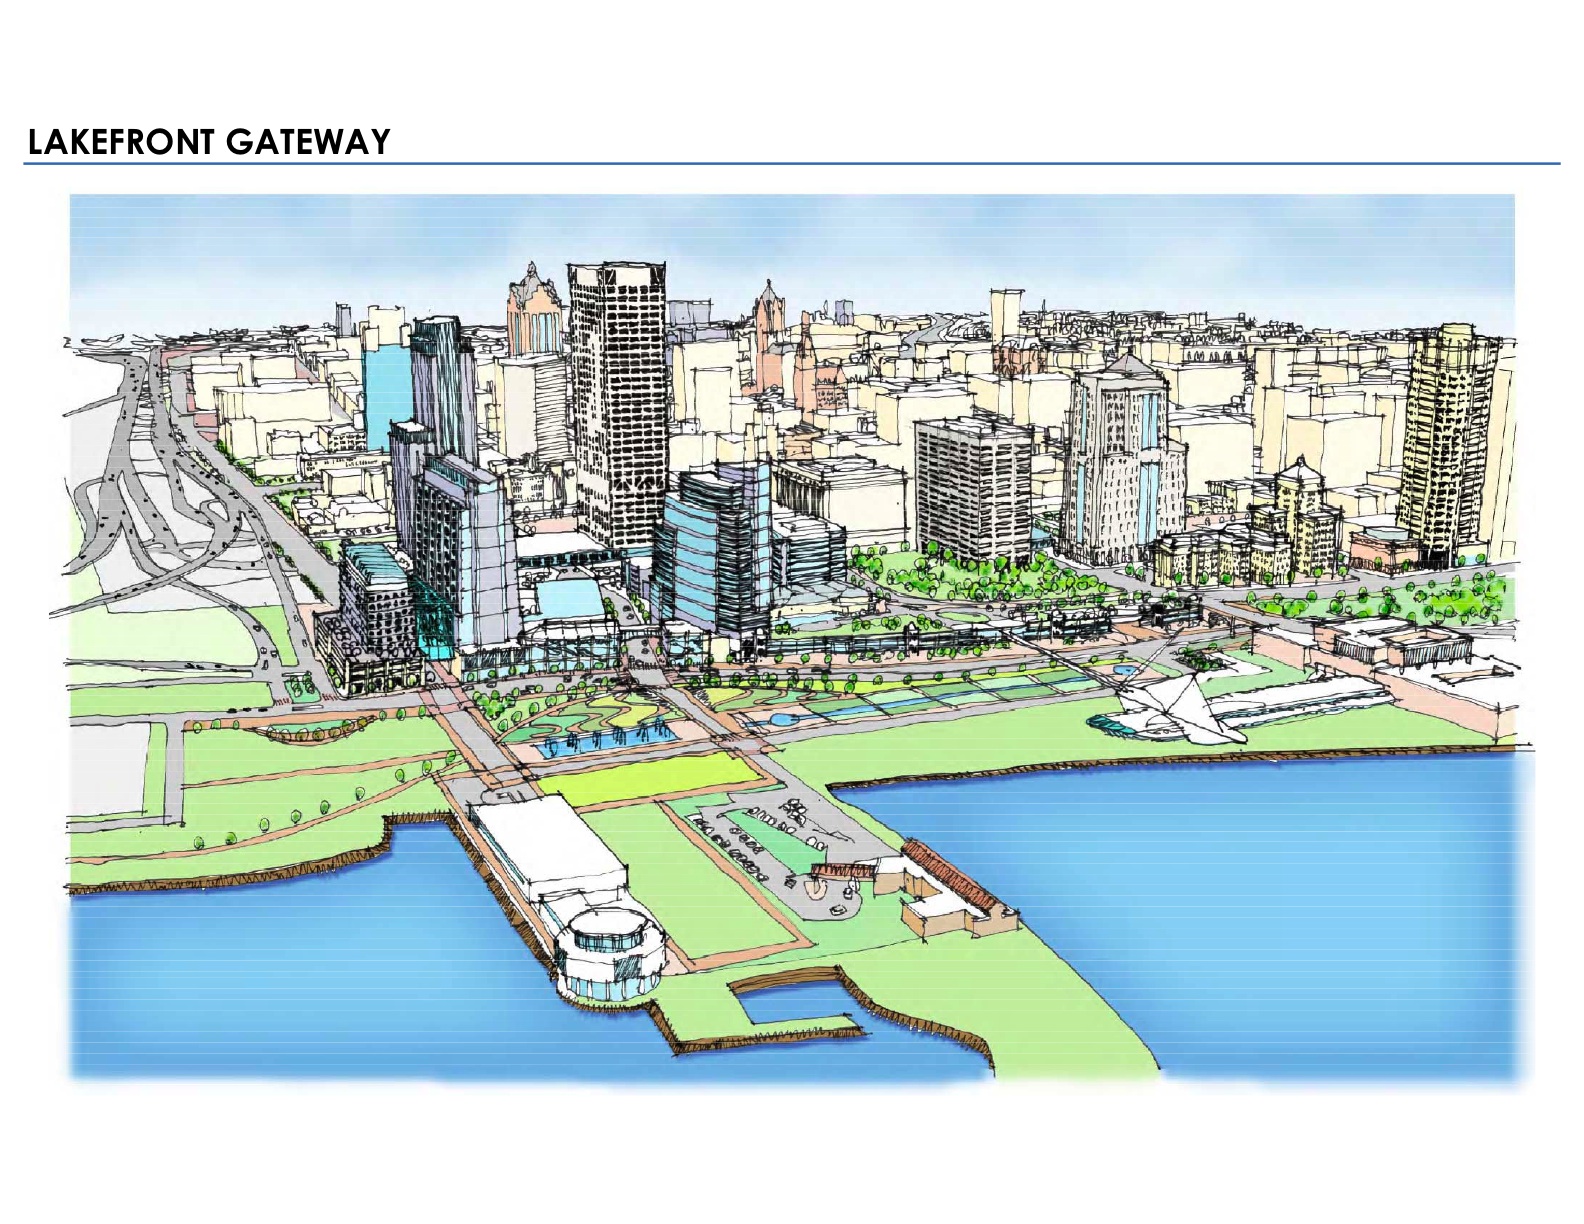 Lakefront Gateway from Downtown Plan